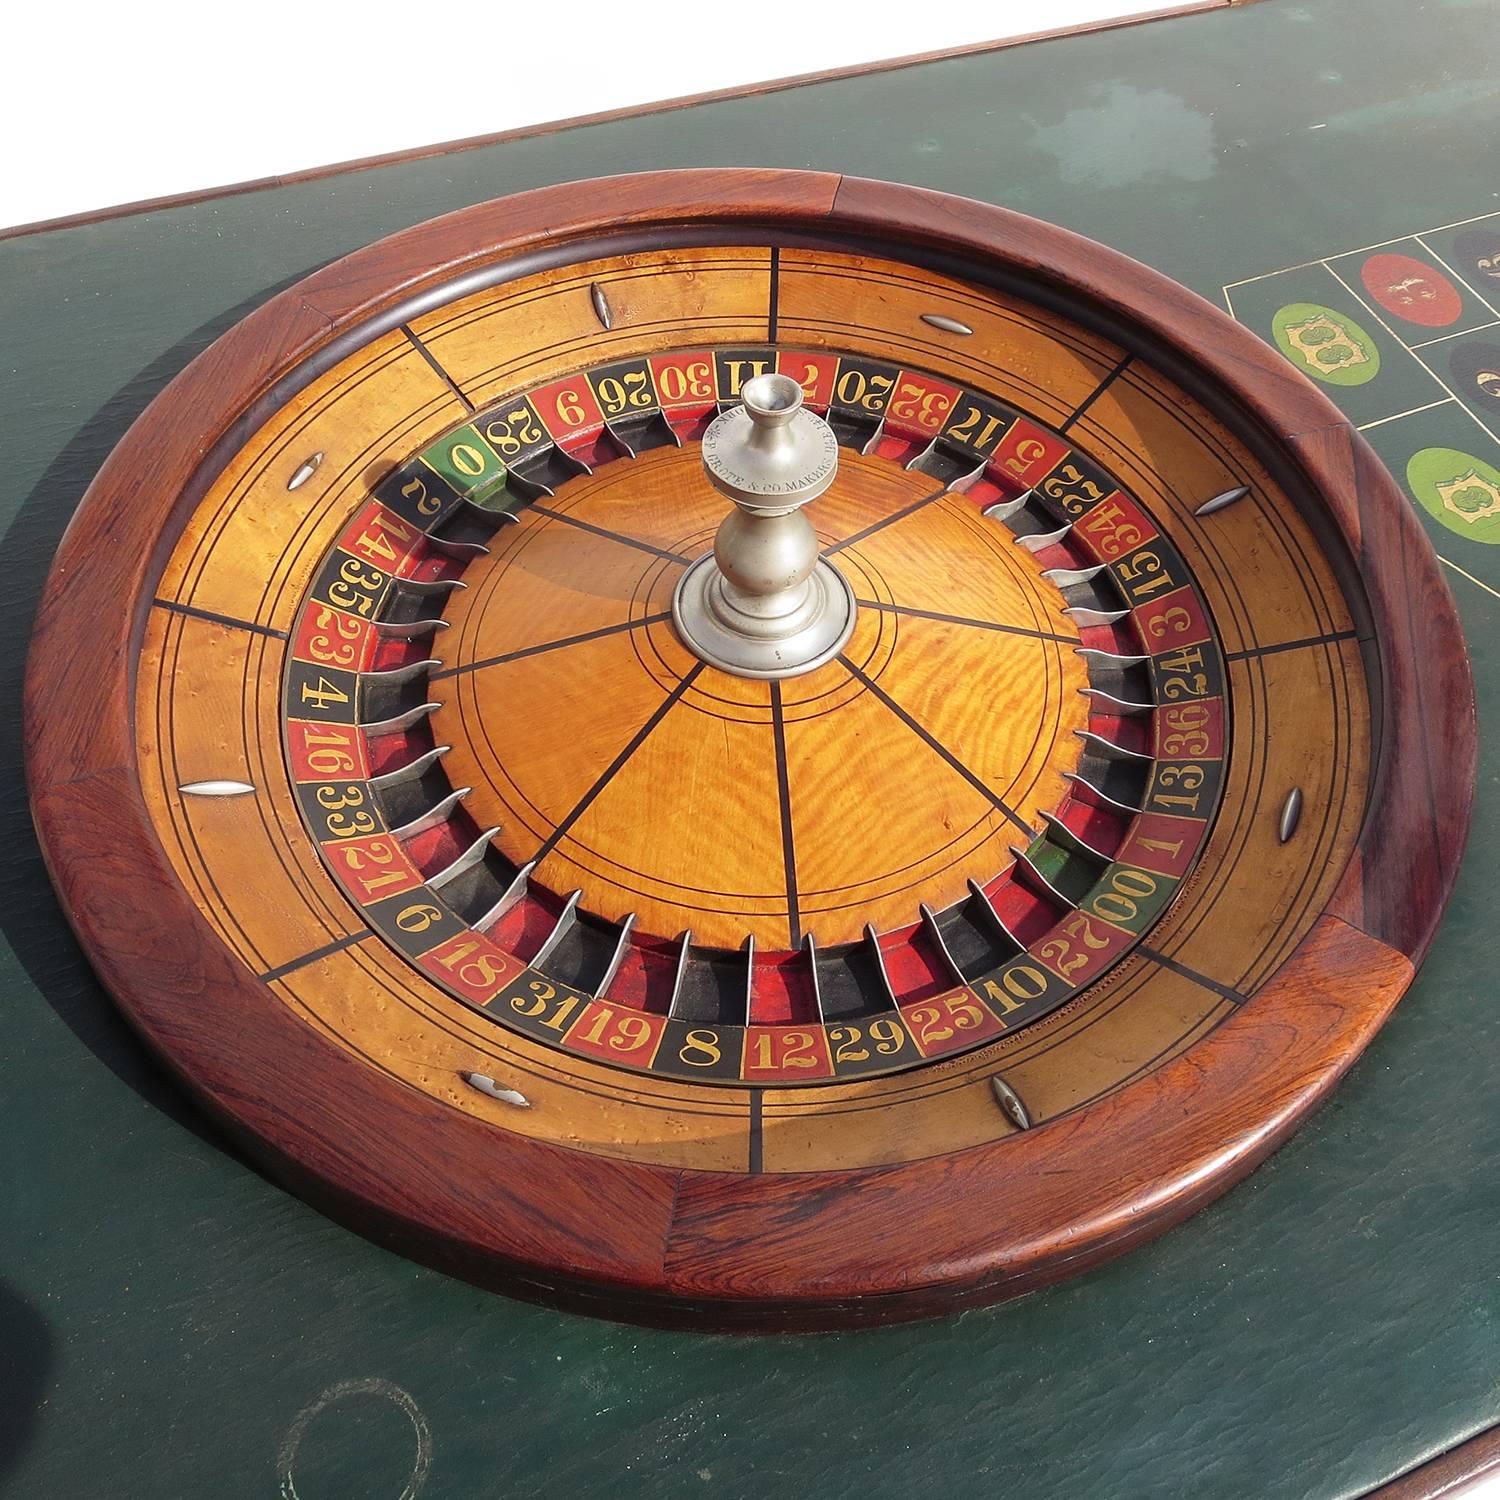 Late Victorian Full Size Victorian Roulette Table by F. Grote & Co. with Oil Cloth Playfield